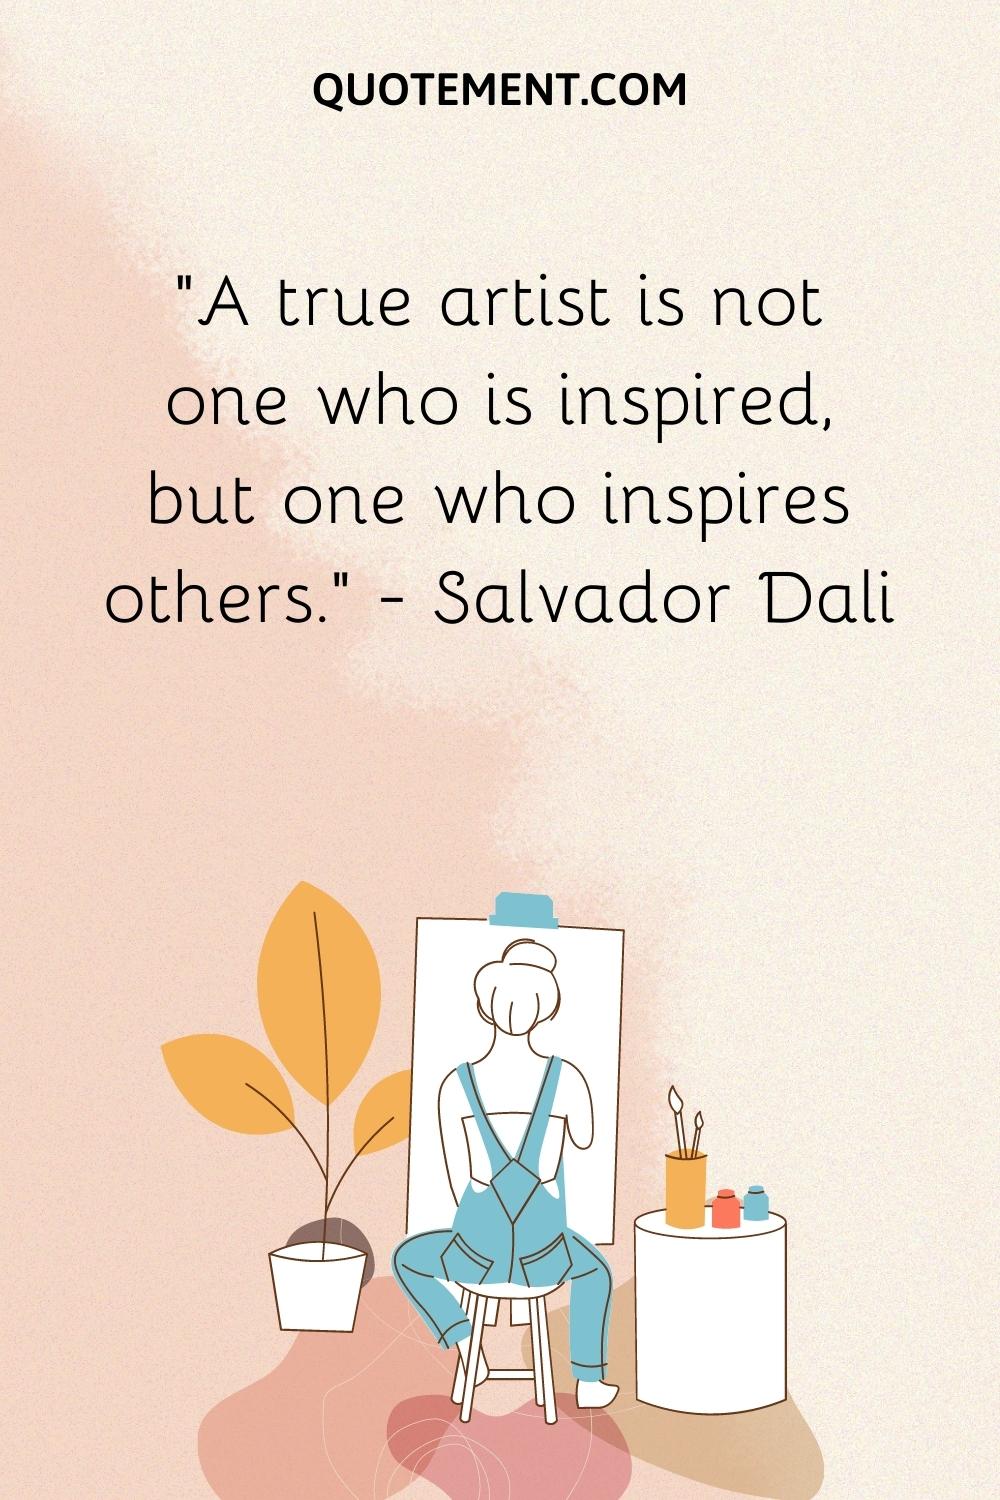 A true artist is not one who is inspired, but one who inspires others